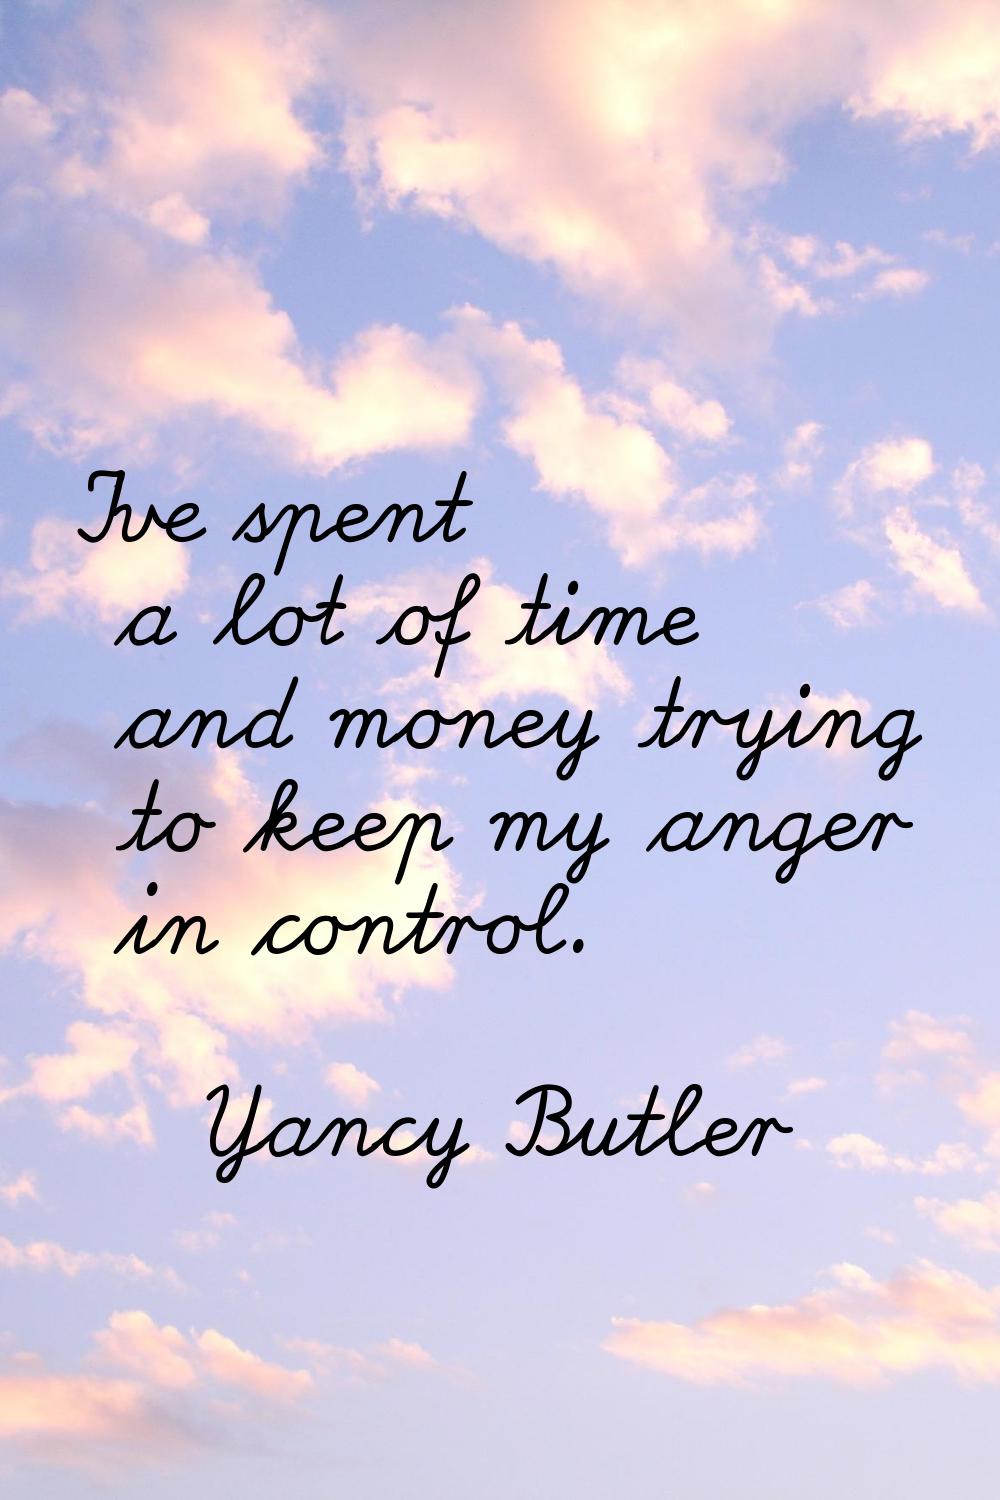 I've spent a lot of time and money trying to keep my anger in control.